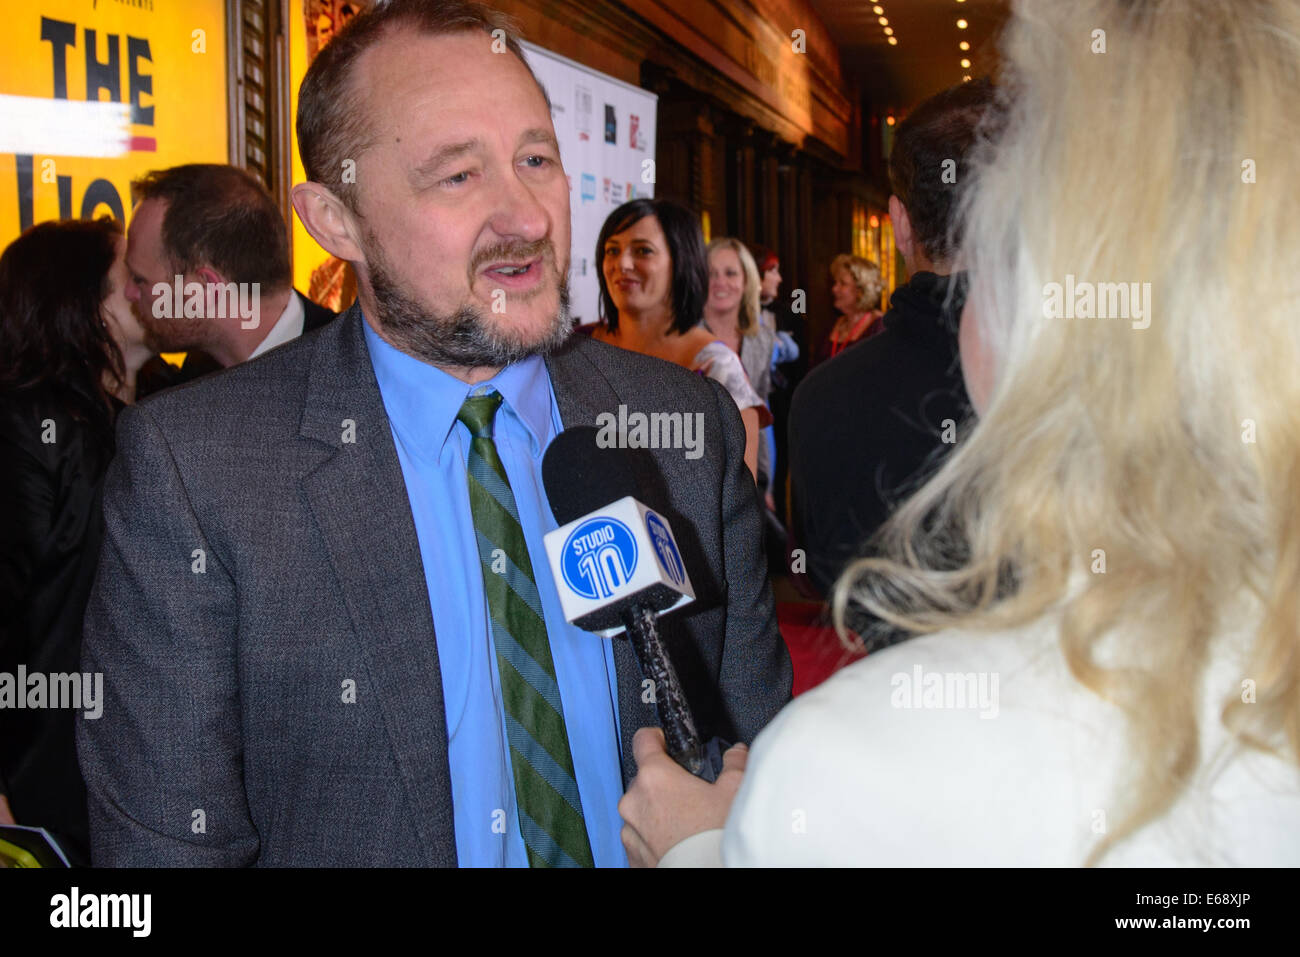 Sydney, Australia. 18th Aug, 2014. Andrew Upton arrives at the 2014 Helpmann Awards at the Capitol Theatre on August 18, 2014 in Sydney, Australia.  The annual Helpmann Awards recognise distinguished artistic achievement and excellence in the many disciplines of the Australian live performance industry. Credit:  MediaServicesAP/Alamy Live News Stock Photo